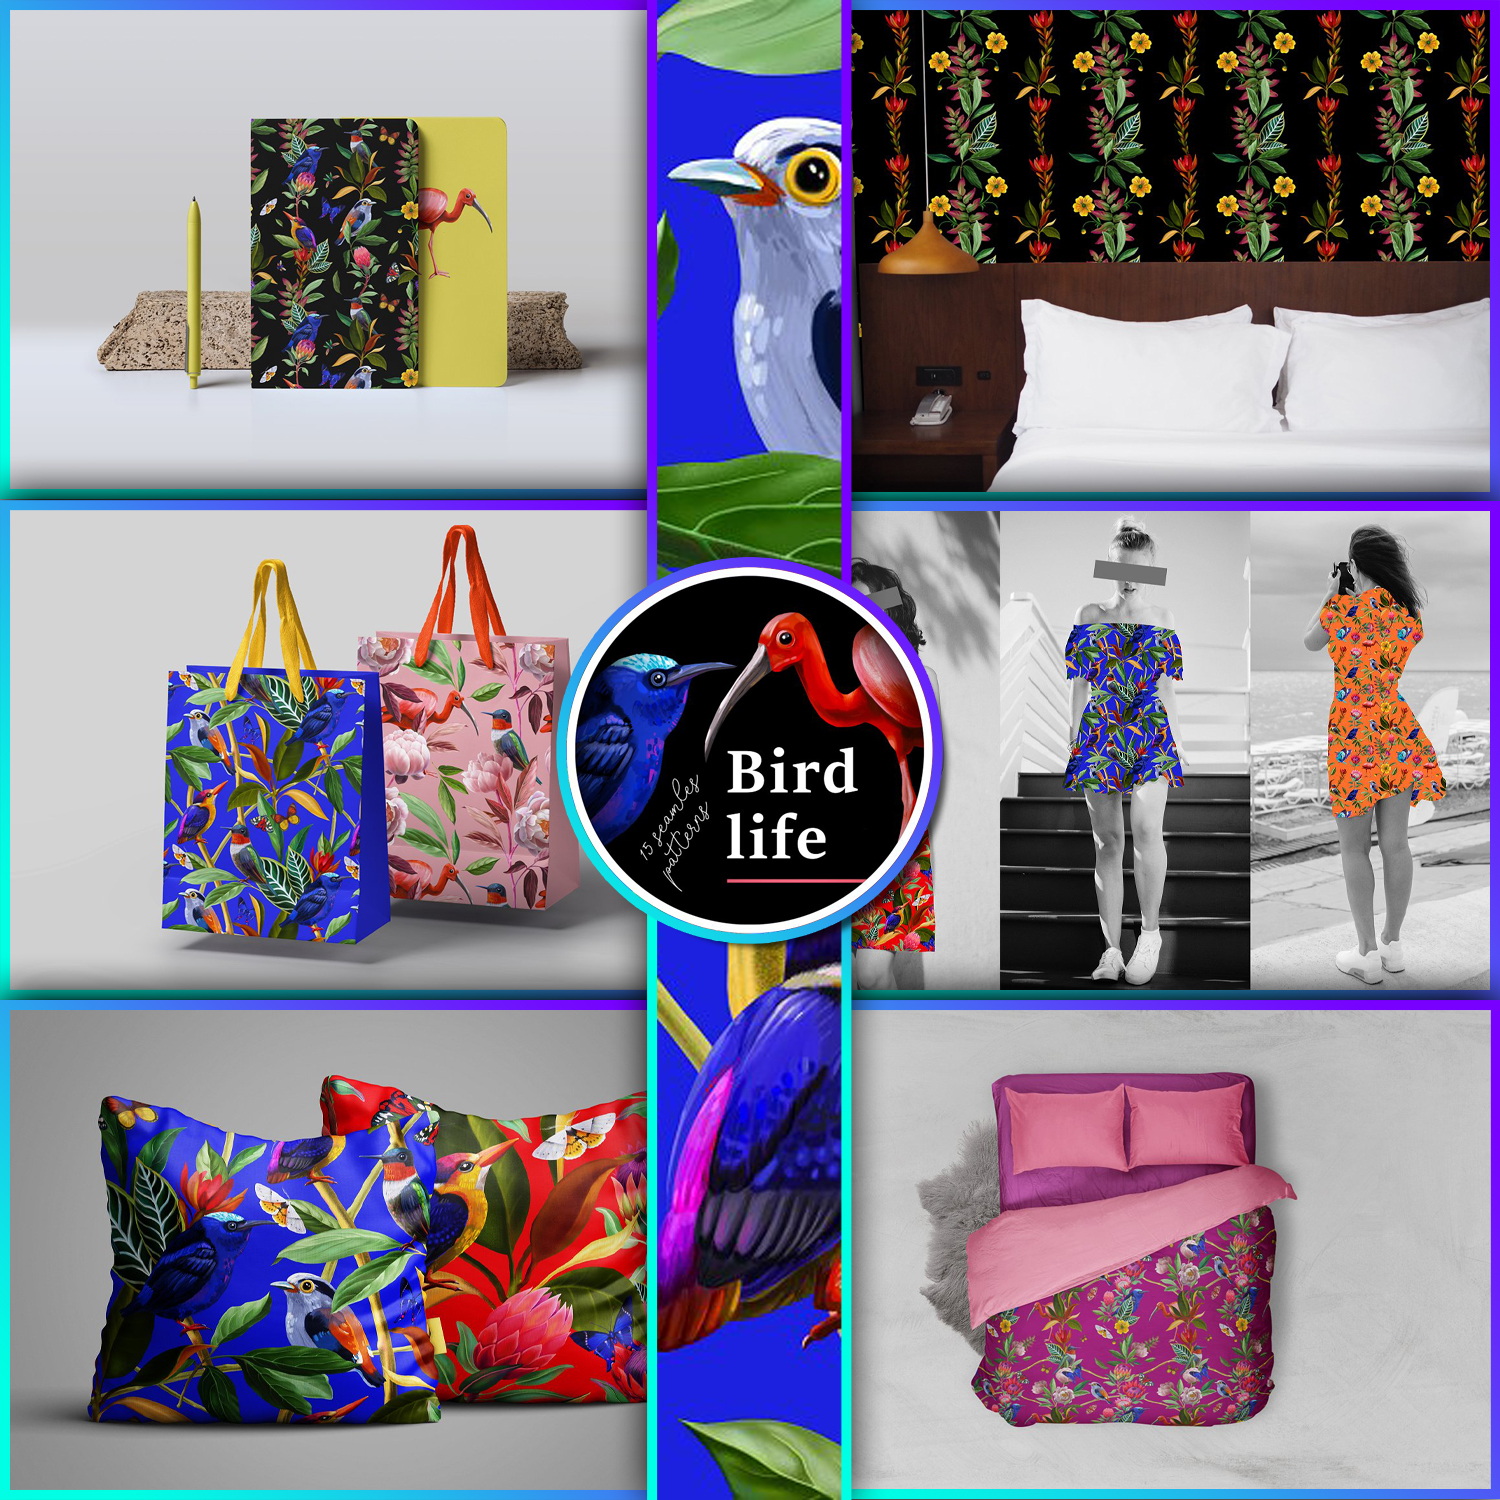 Preview bird life trend tropical patterns.